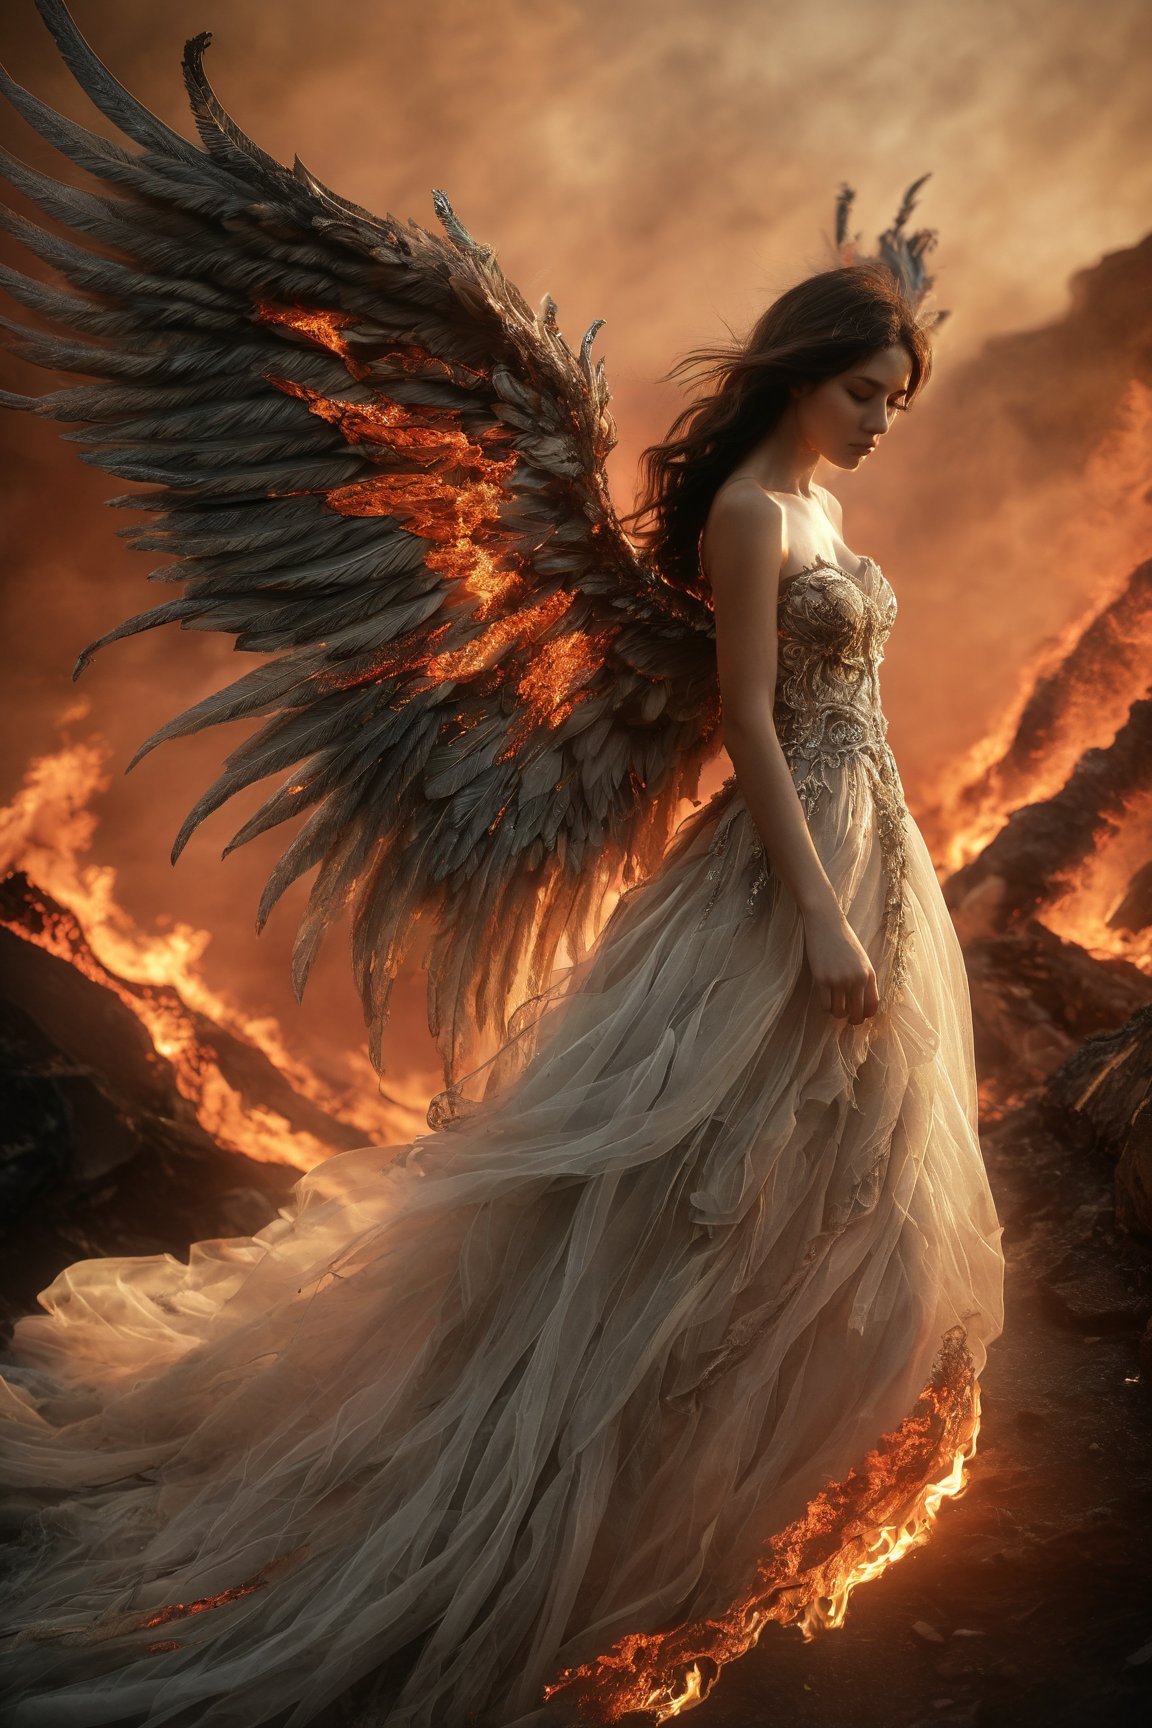 A woman with large, intricately designed wings, crafted from crackling flames and wispy smoke, stands defiantly amidst a scorched earthscape. Her flowing, ethereal gown billows around her as she perches atop rocky terrain, the fiery landscape's infernal glow casting an apocalyptic ambiance. The burning material of her wings, now freed from their fiery prison, seem to defy the blazing background, creating a striking juxtaposition of contrasts.